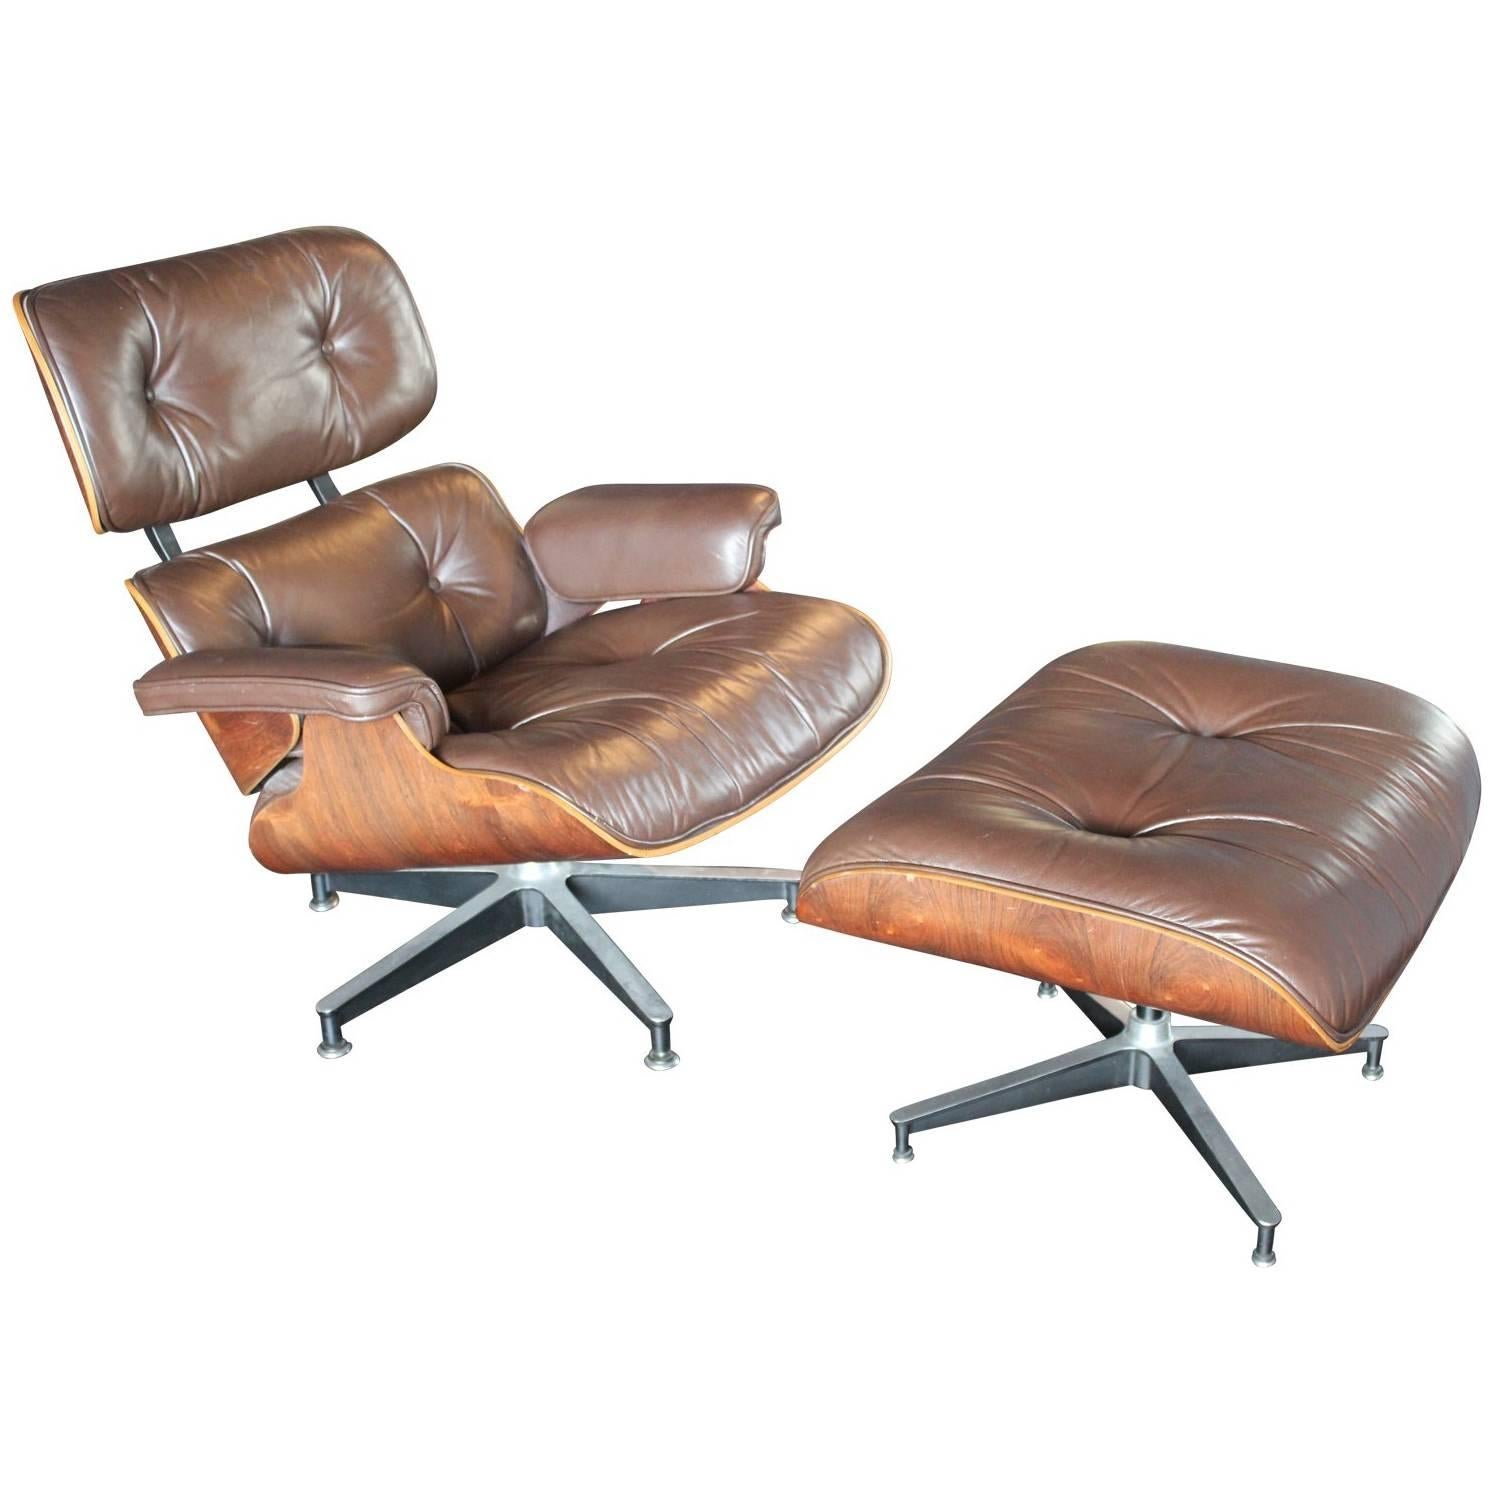 Modern Rosewood Eames Lounge Chair and Ottoman in Dark Brown Leather 670